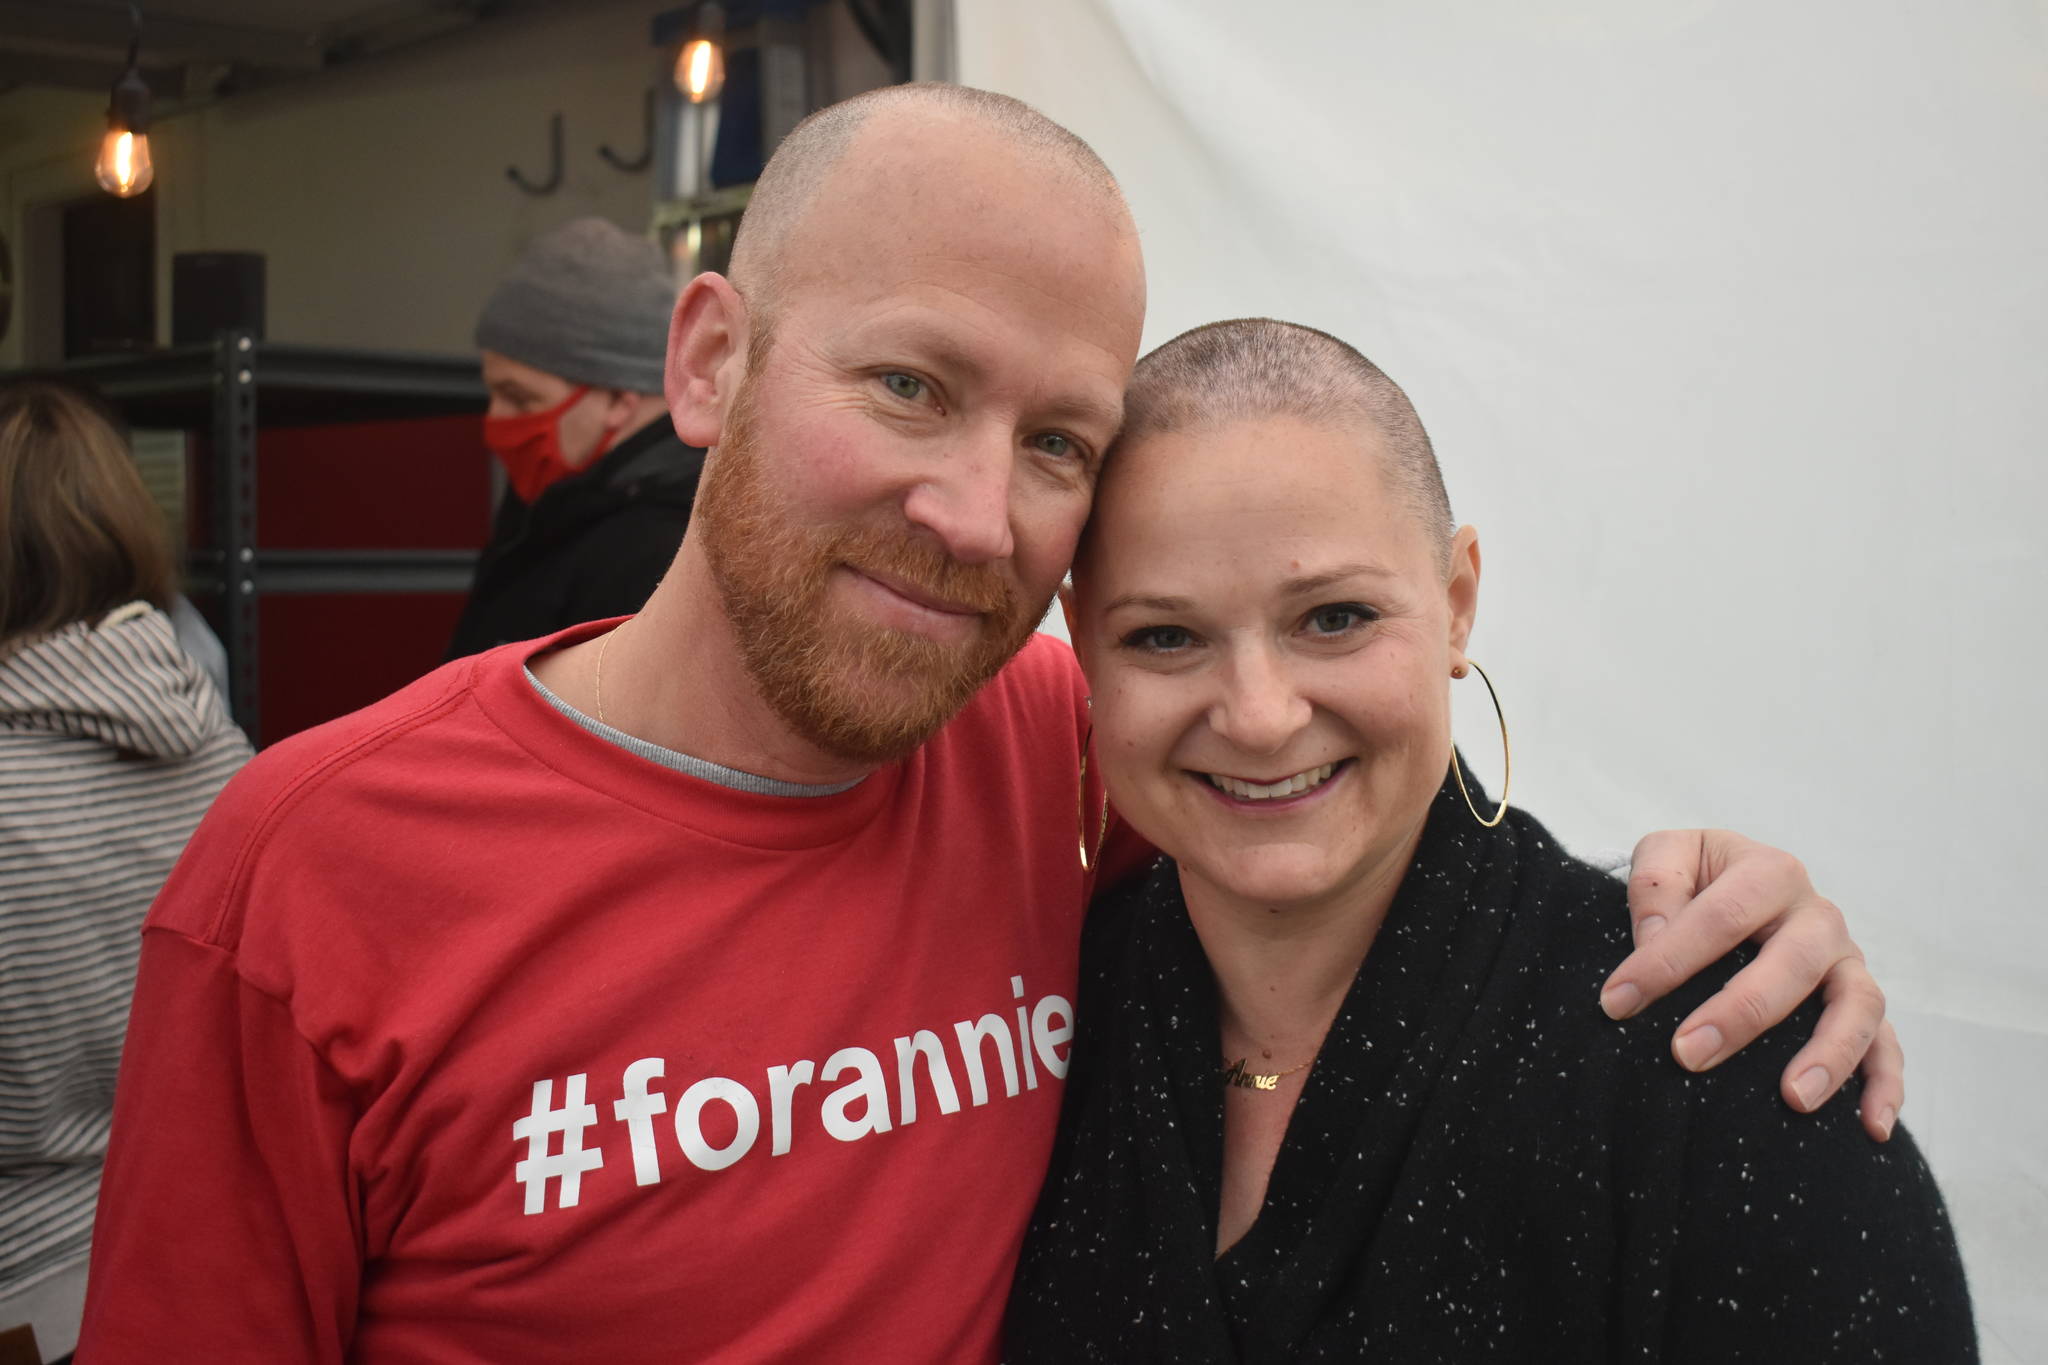 Jason McFadyen, left, organized about a dozen friends to shave their heads in support of Annie Cash as she goes through breast cancer treatment. Cash was voted top real estate agent, business person and community leader in the Whidbey News-Times’ Best of Whidbey 2020 contest. Photos by Emily Gilbert/Whidbey News-Times